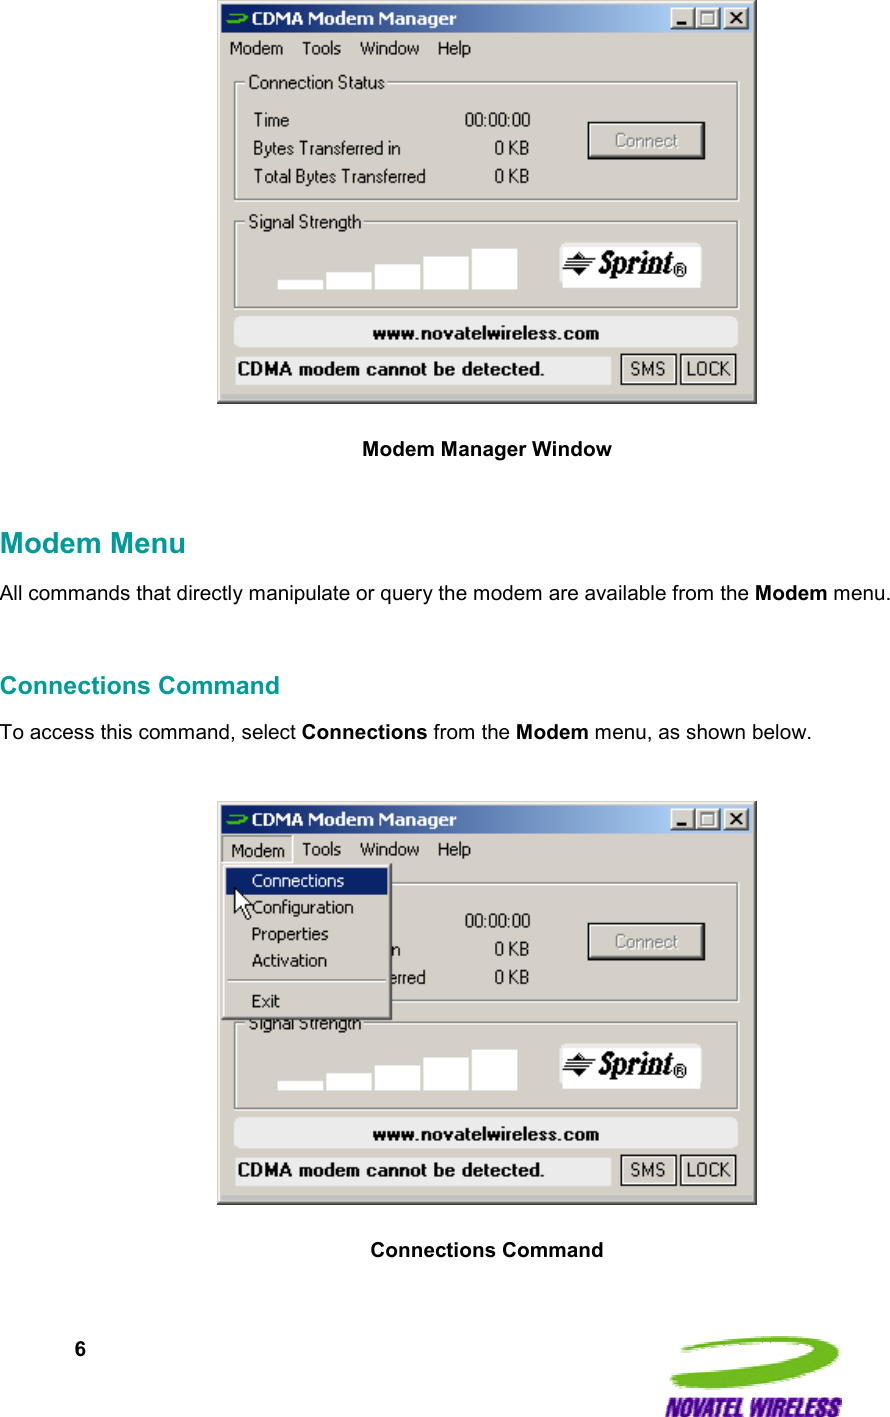  6   Modem Manager Window  Modem Menu All commands that directly manipulate or query the modem are available from the Modem menu.  Connections Command To access this command, select Connections from the Modem menu, as shown below.    Connections Command  